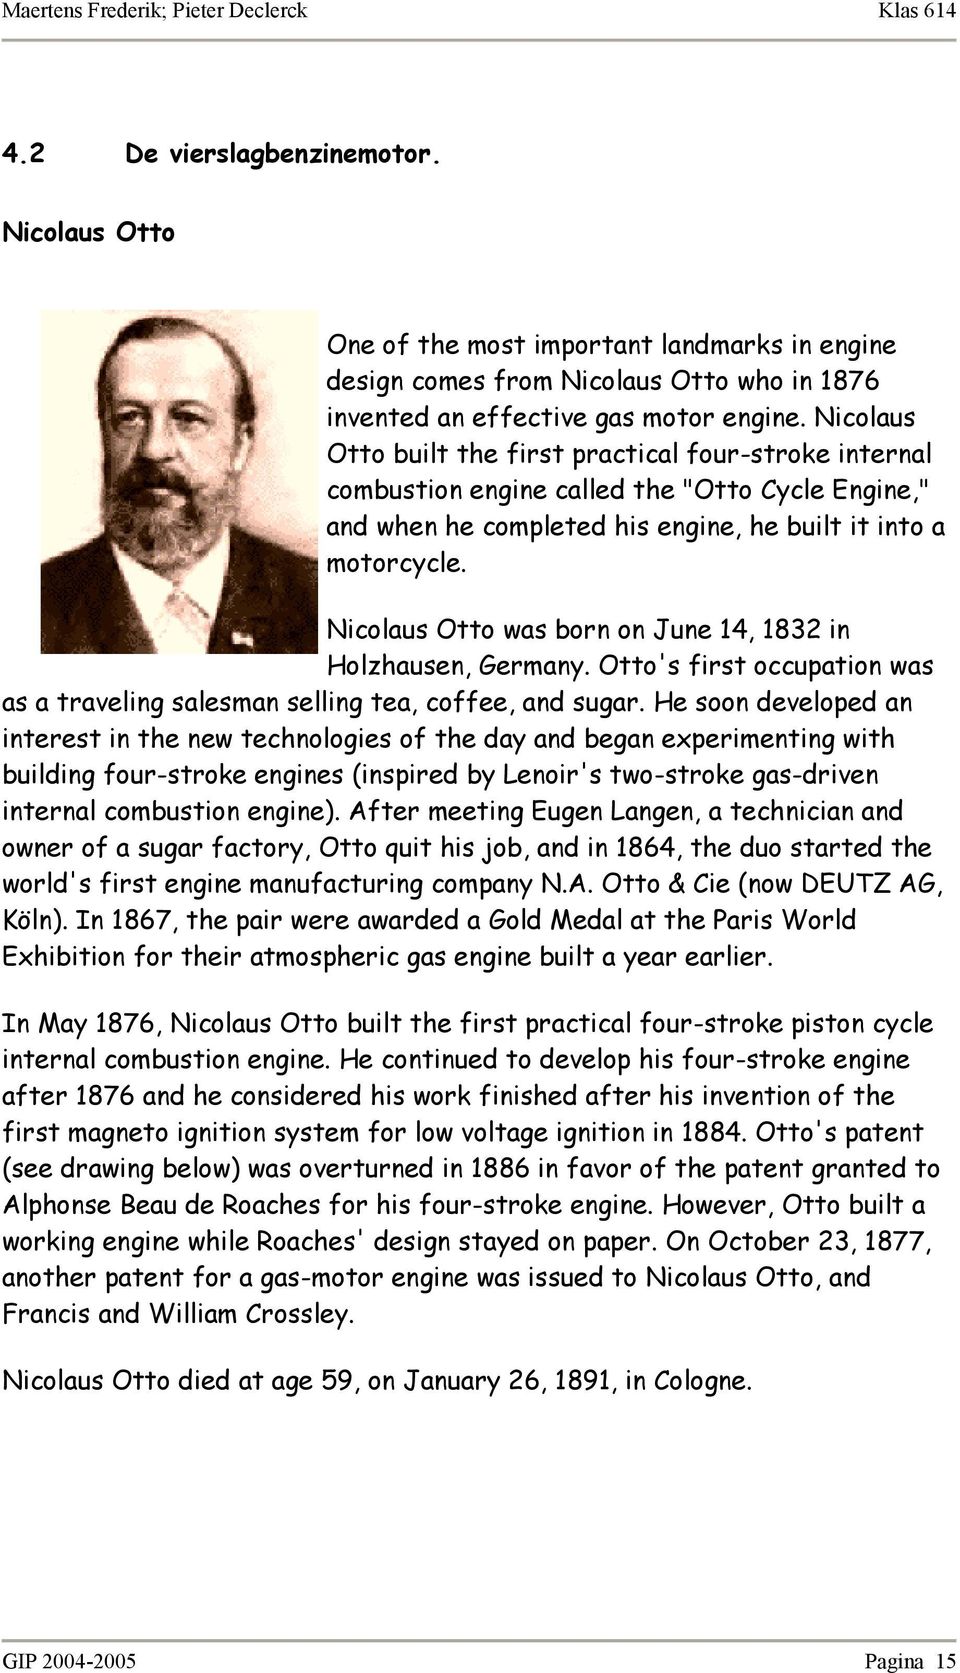 Nicolaus Otto was born on June 14, 1832 in Holzhausen, Germany. Otto's first occupation was as a traveling salesman selling tea, coffee, and sugar.